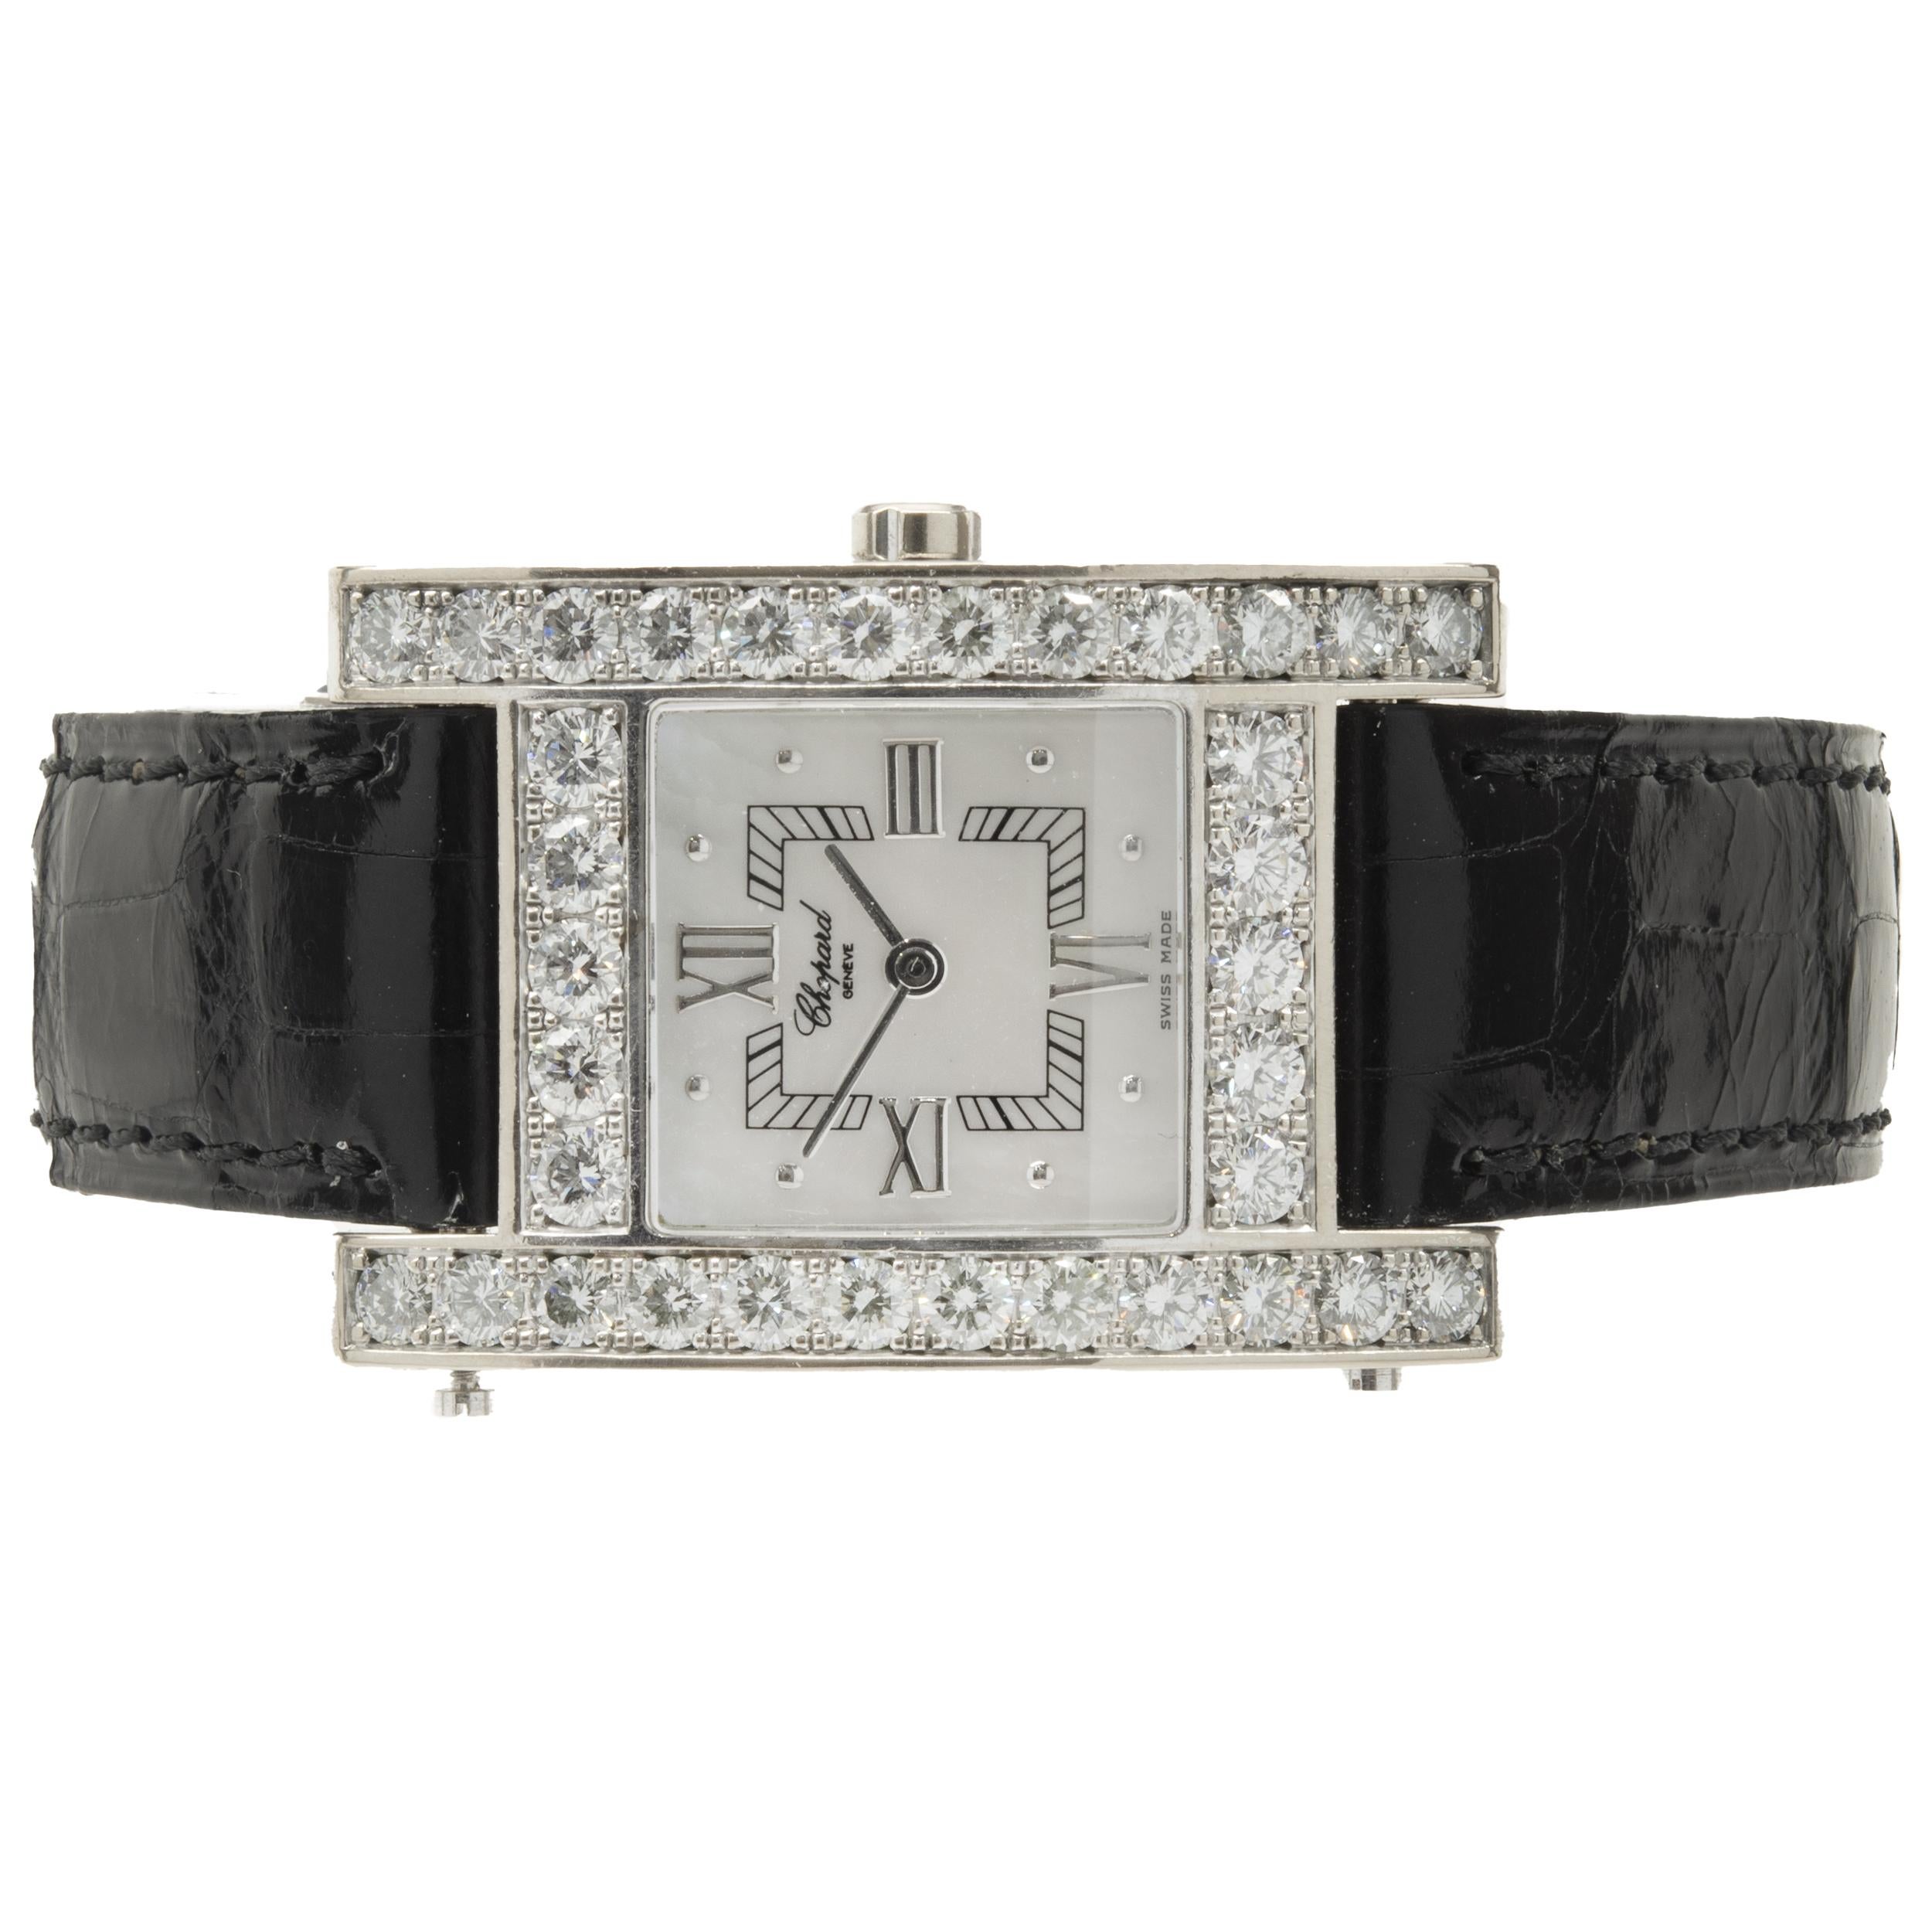 Movement: quartz
Function: hours, minutes
Case: 24x25mm square case, diamond bezel
Band: Chopard black leather strap, buckle
Dial: mother of pearl roman
Reference #: 445/1
Serial: 517XXX

Complete with original box, no papers
Guaranteed to be